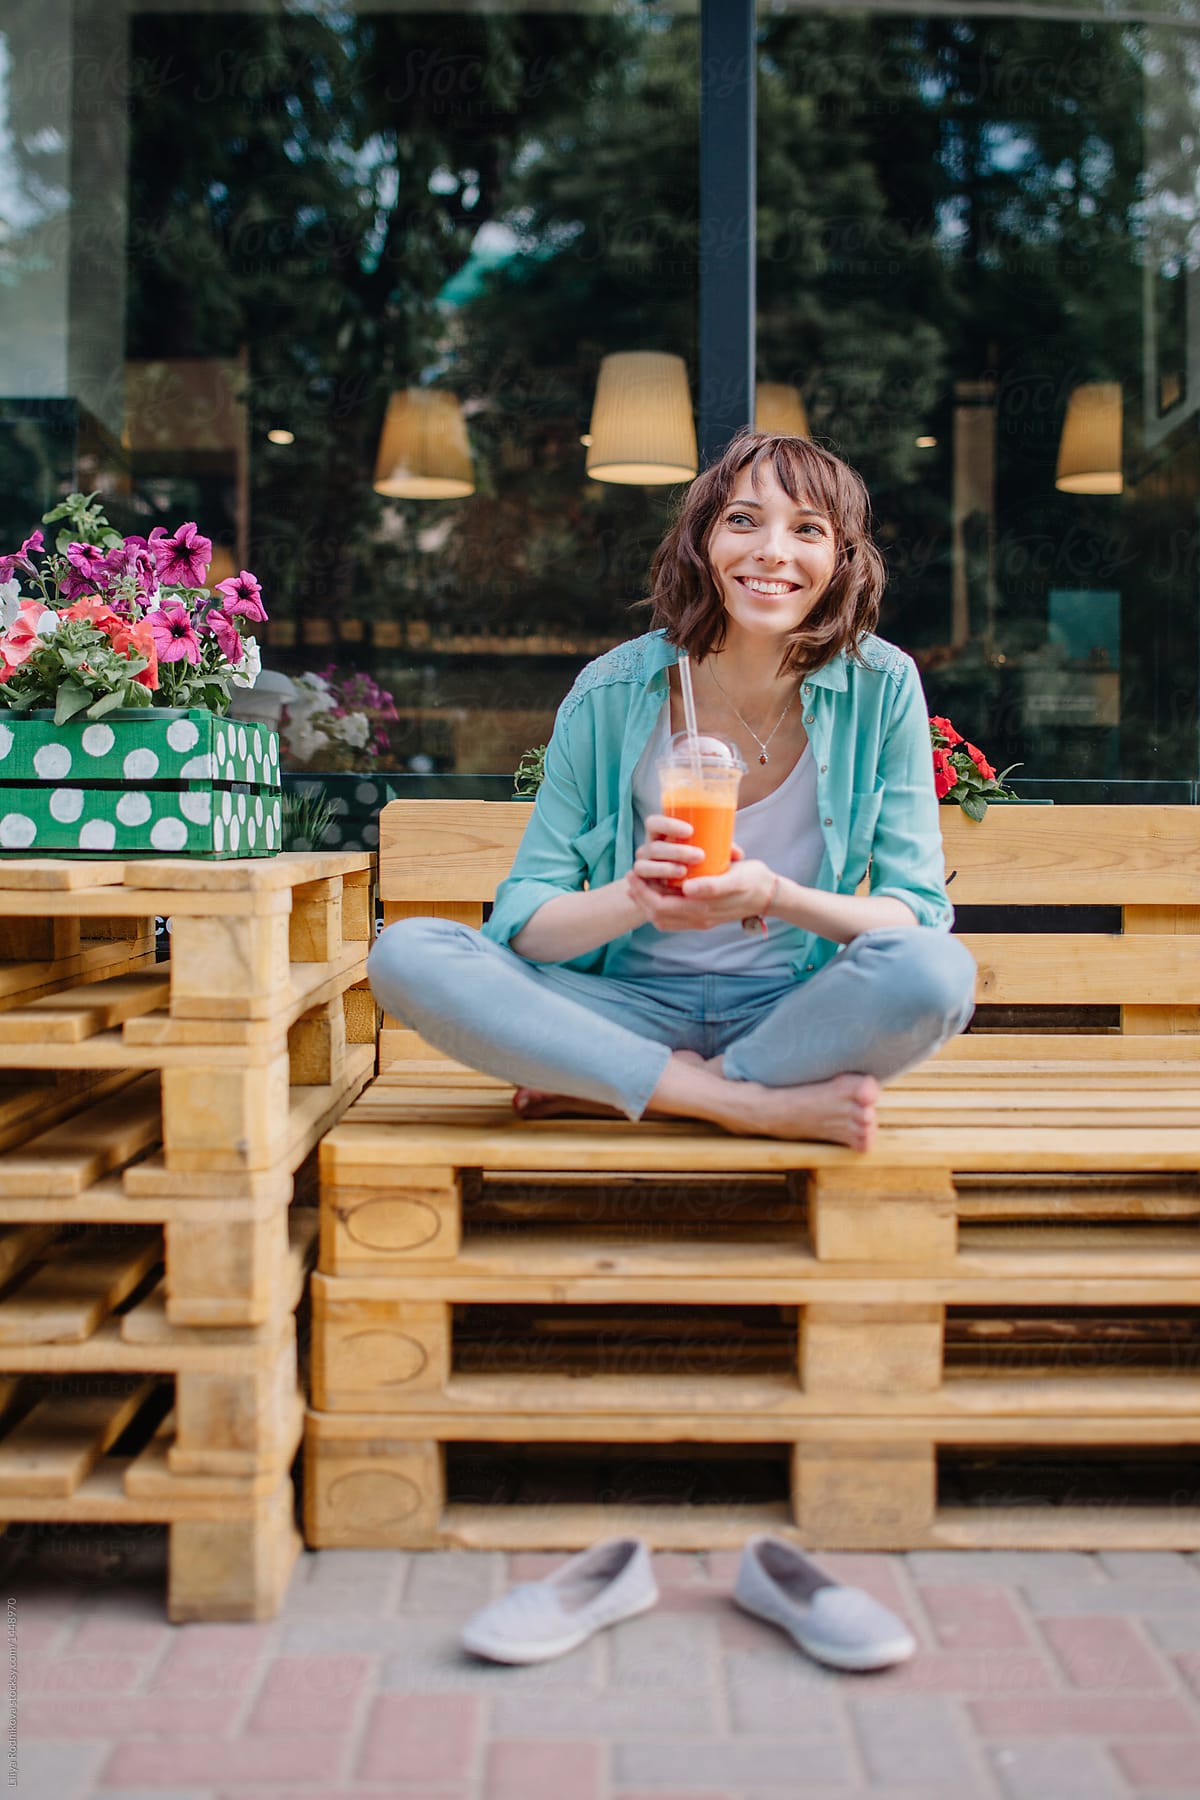 Urban Lifestyle Shot Of Smiling Woman Sitting Barefoot On The Bench In